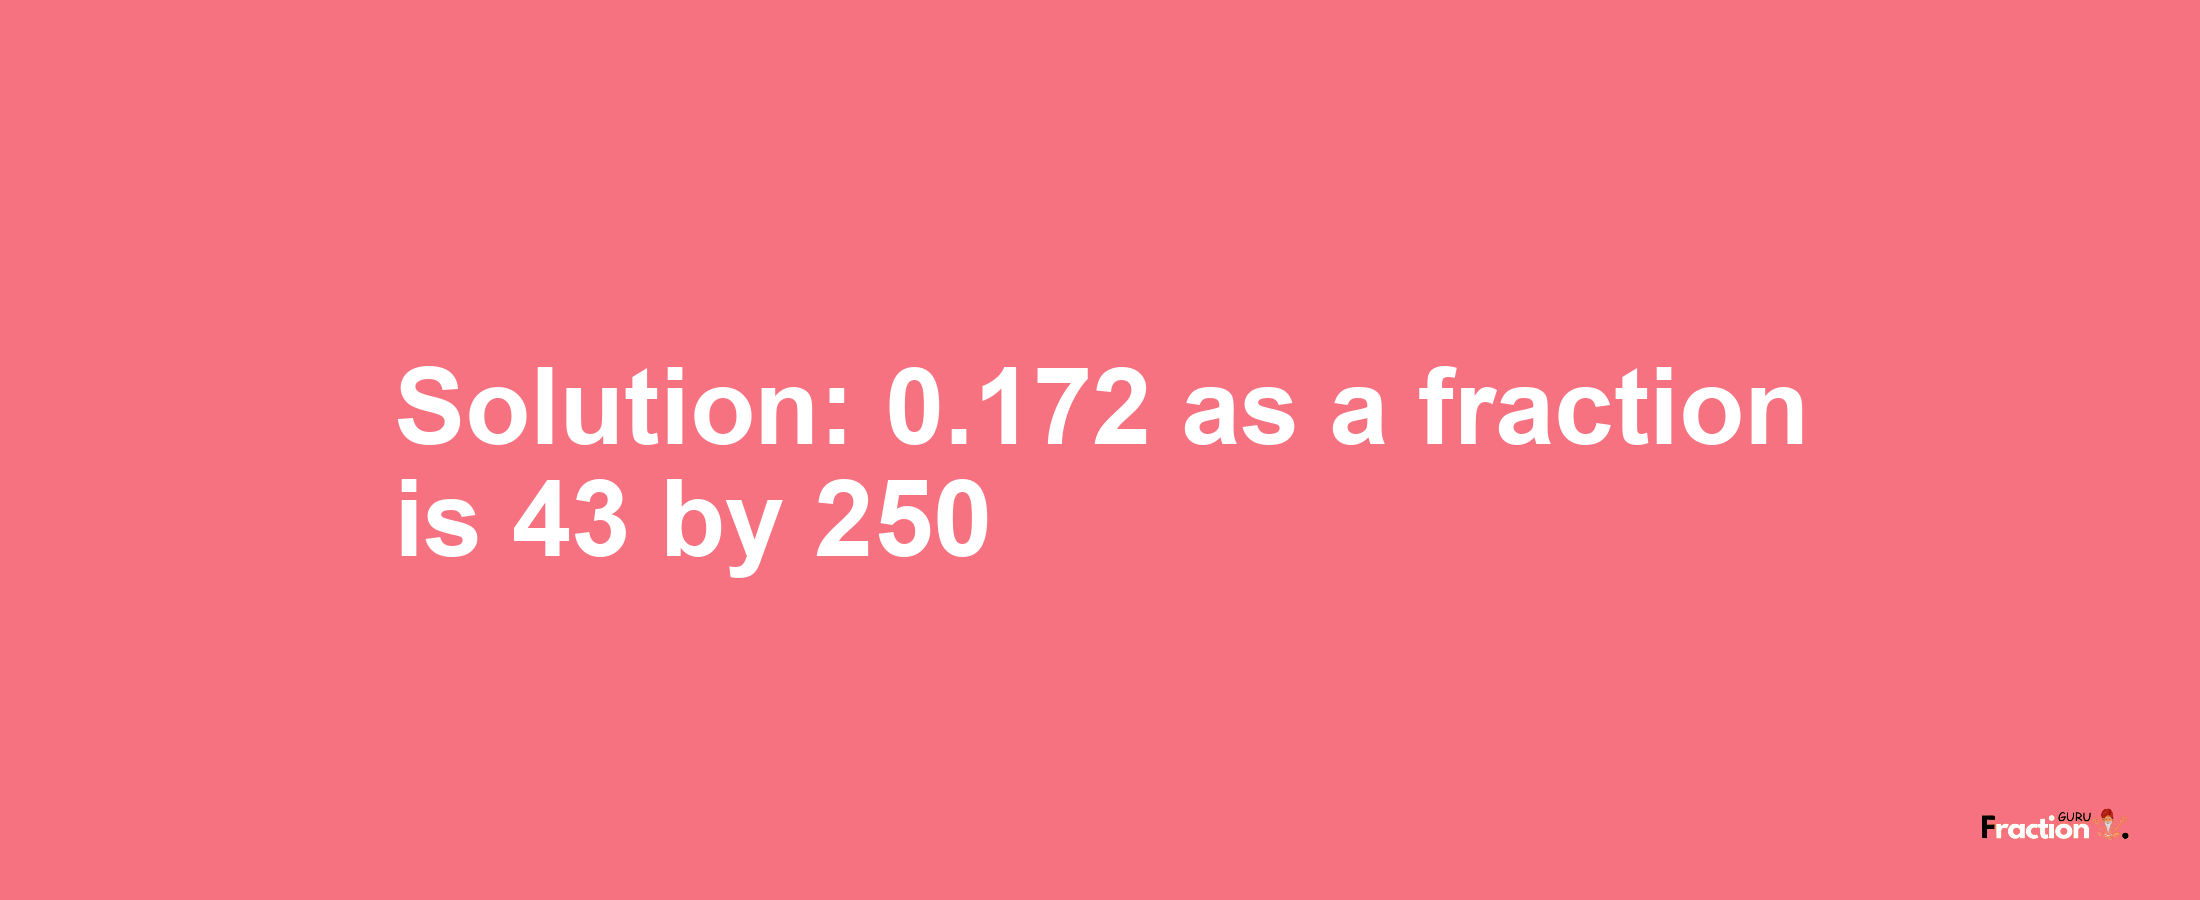 Solution:0.172 as a fraction is 43/250